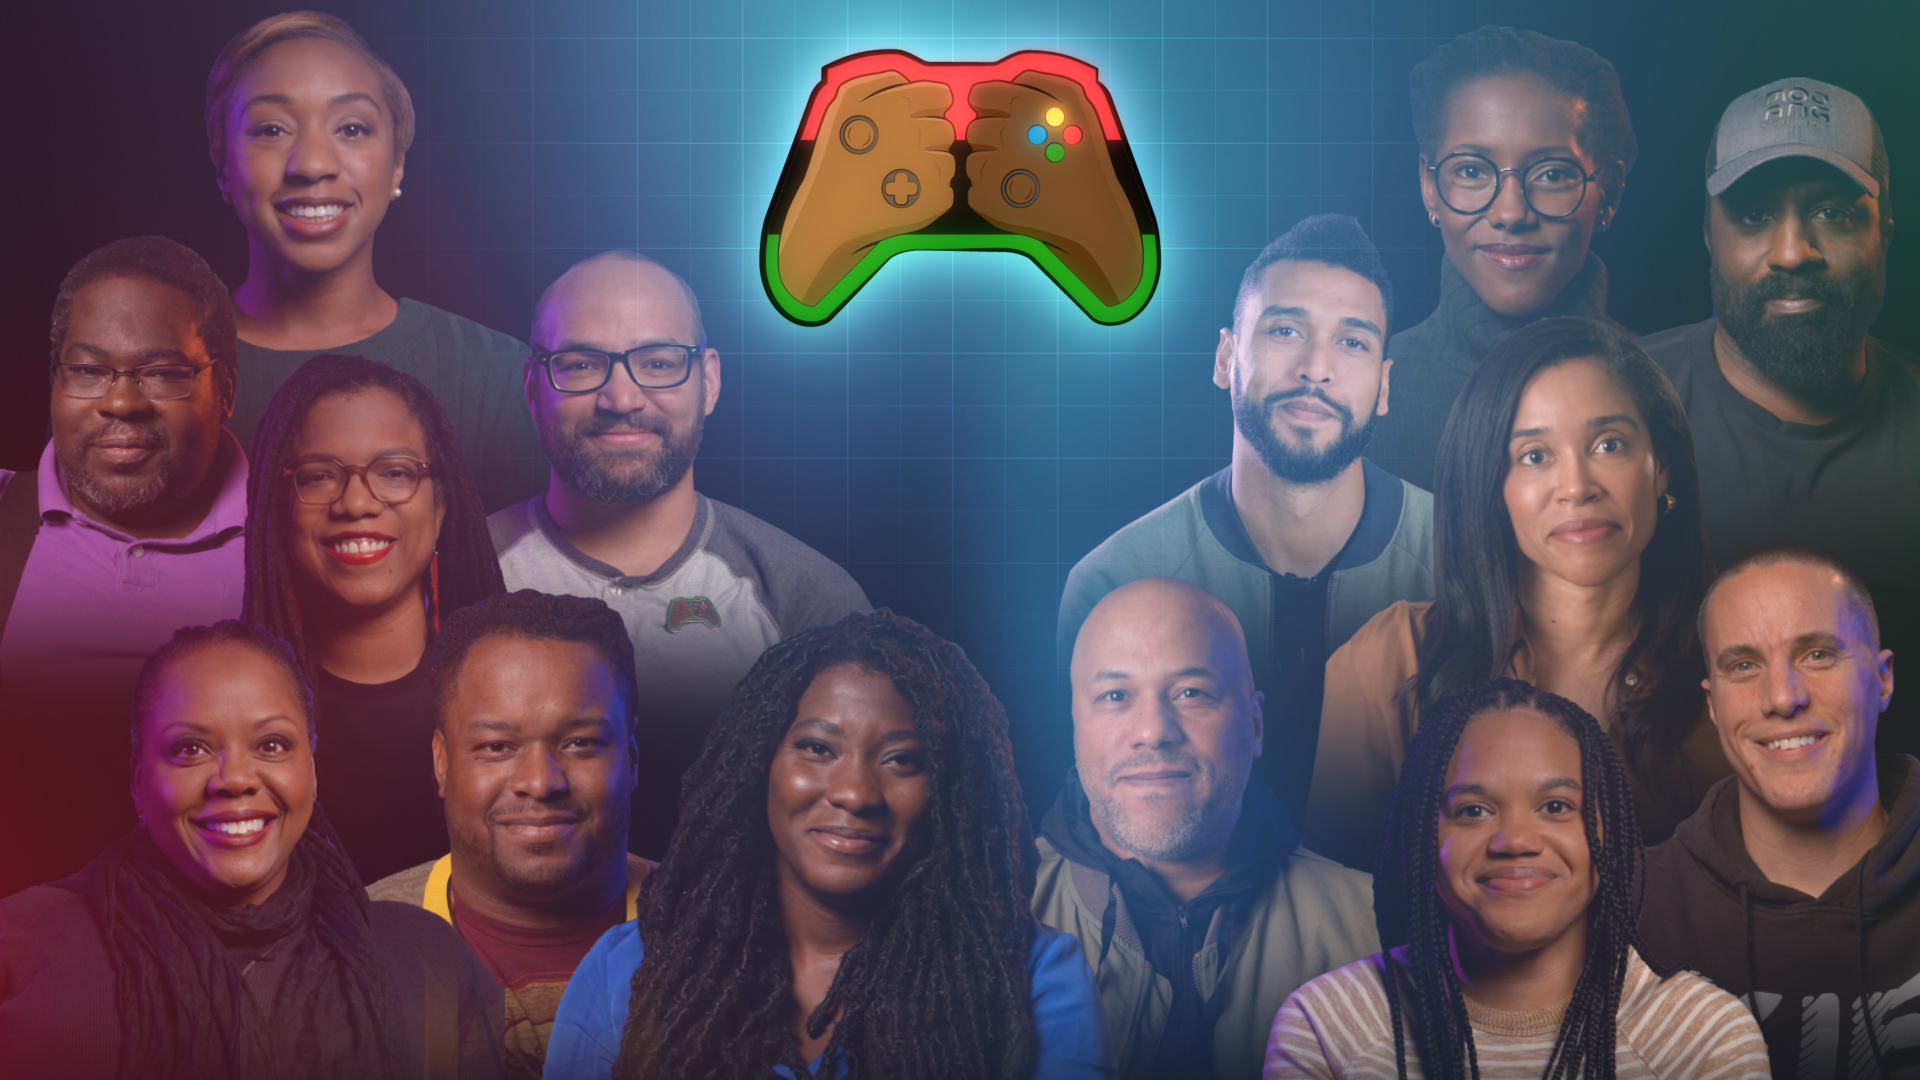 An Xbox controller with two closed hands over it with varying skin tones and the words “Project Amplify” on a background featuring the profile images of 14 people.